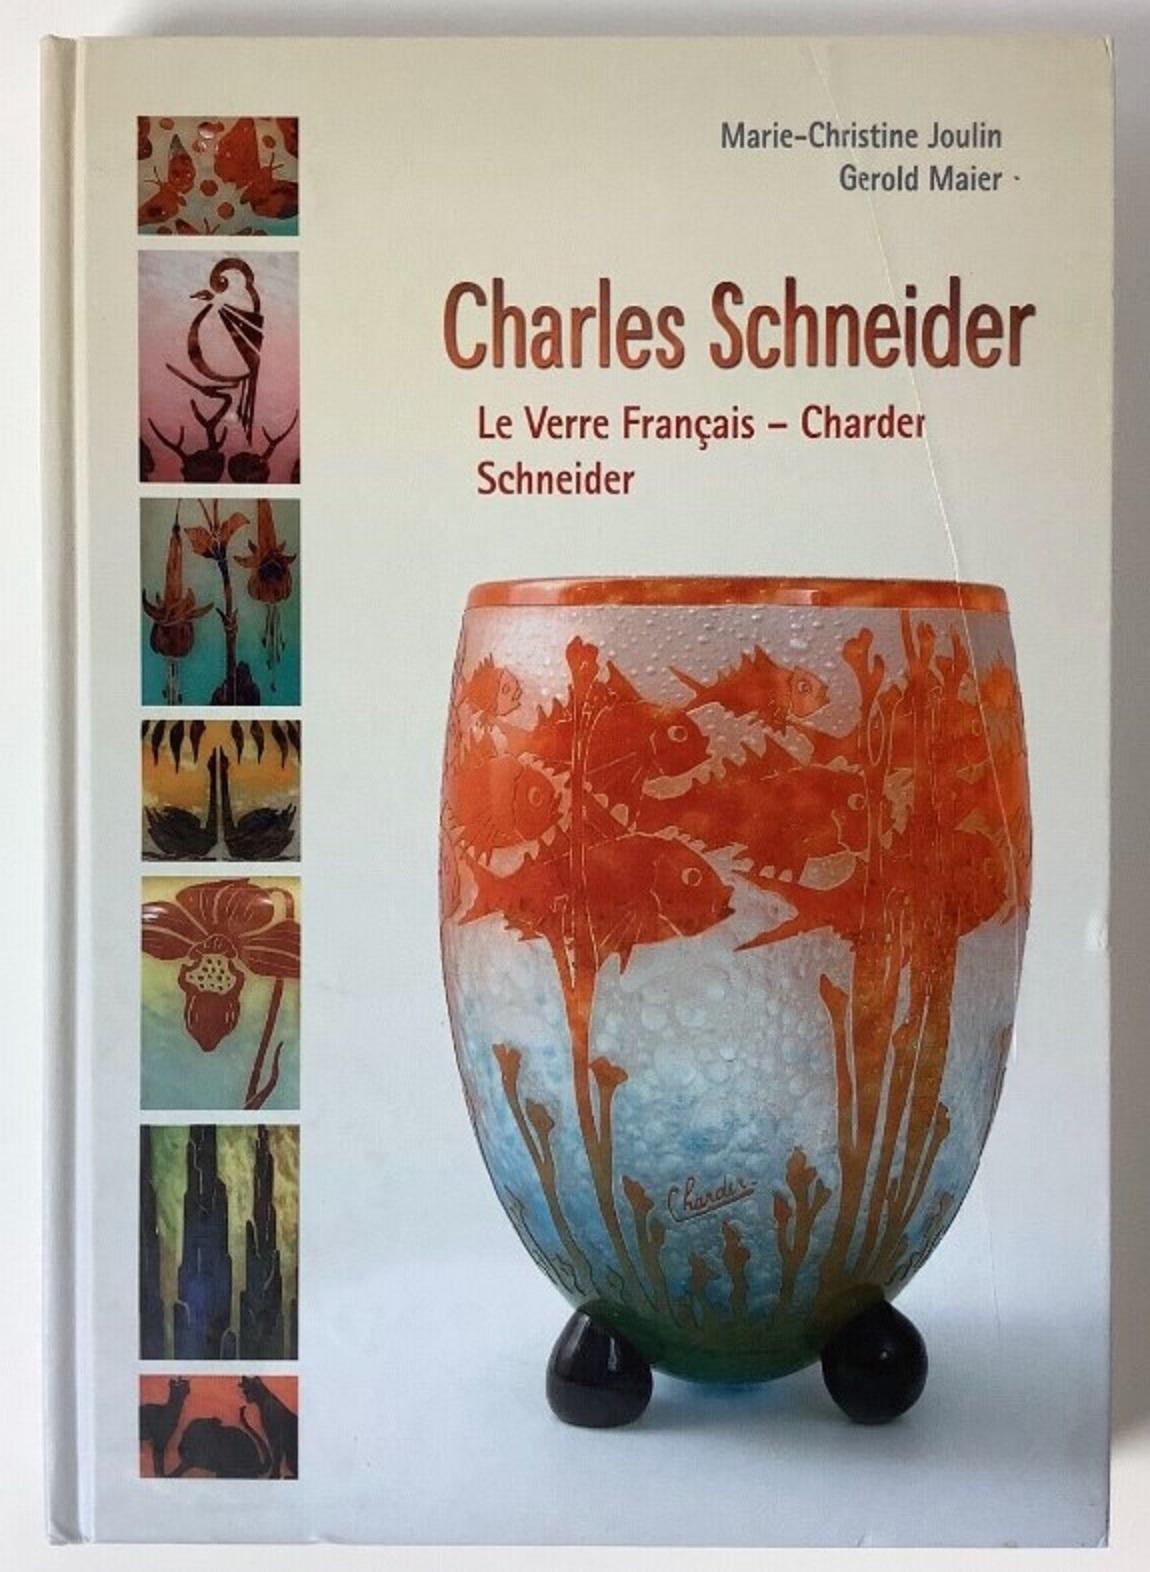 Vase Sign: Le Verre Francais , Charder
acid worked
Le Verre cameo glass was a separate line of art glass designed by Charles Schneider. Its production was made at the same time as the Schneider designed glasses 1918 –1933. But from 1919 the two